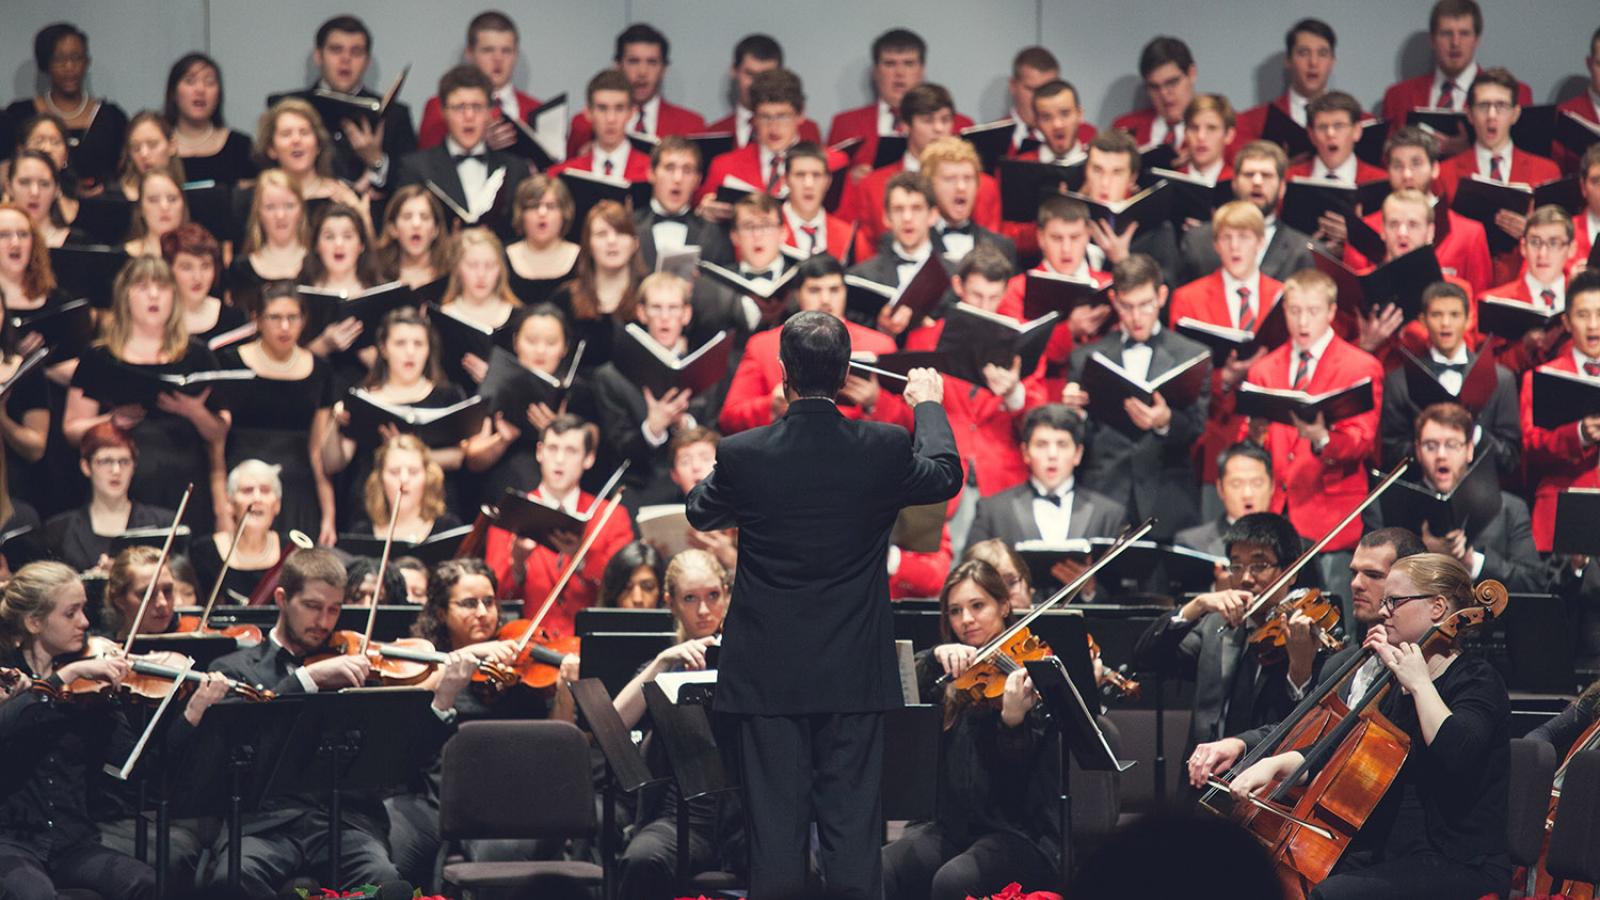 School of Music ensembles perform in the Annual Music Celebration Concert each December